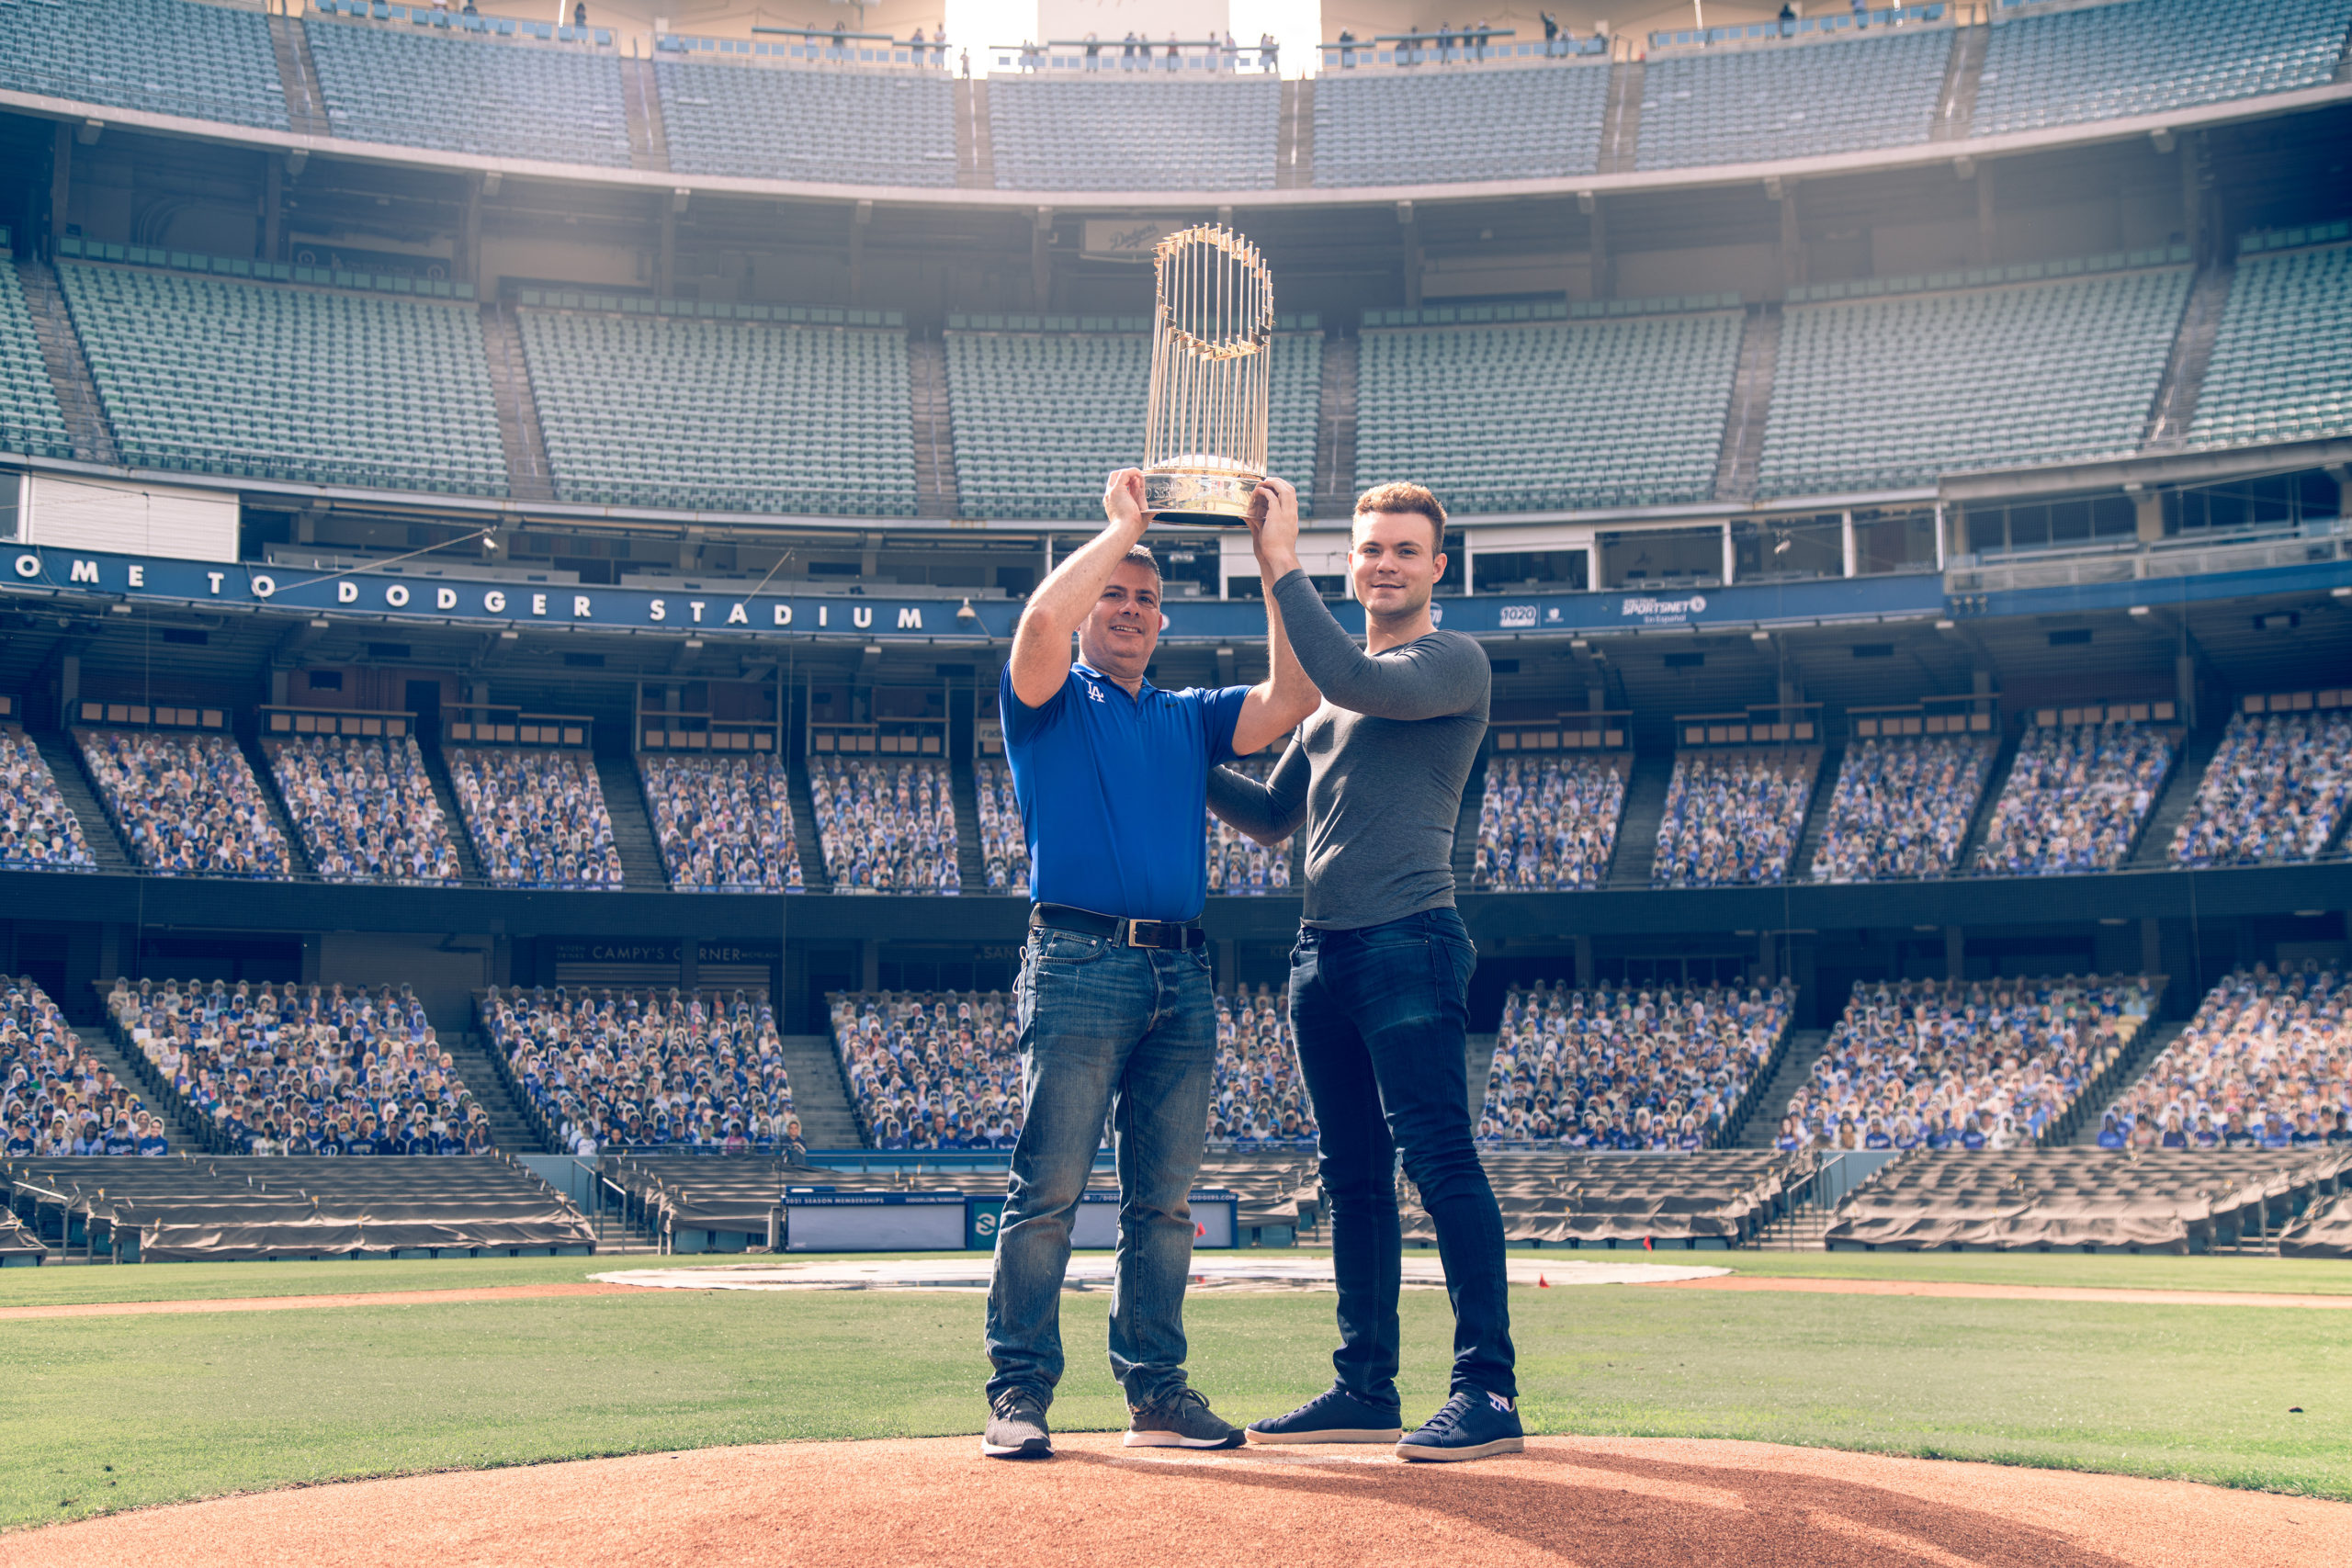 19 Fun Facts About Dodger Stadium Every Family Should Know